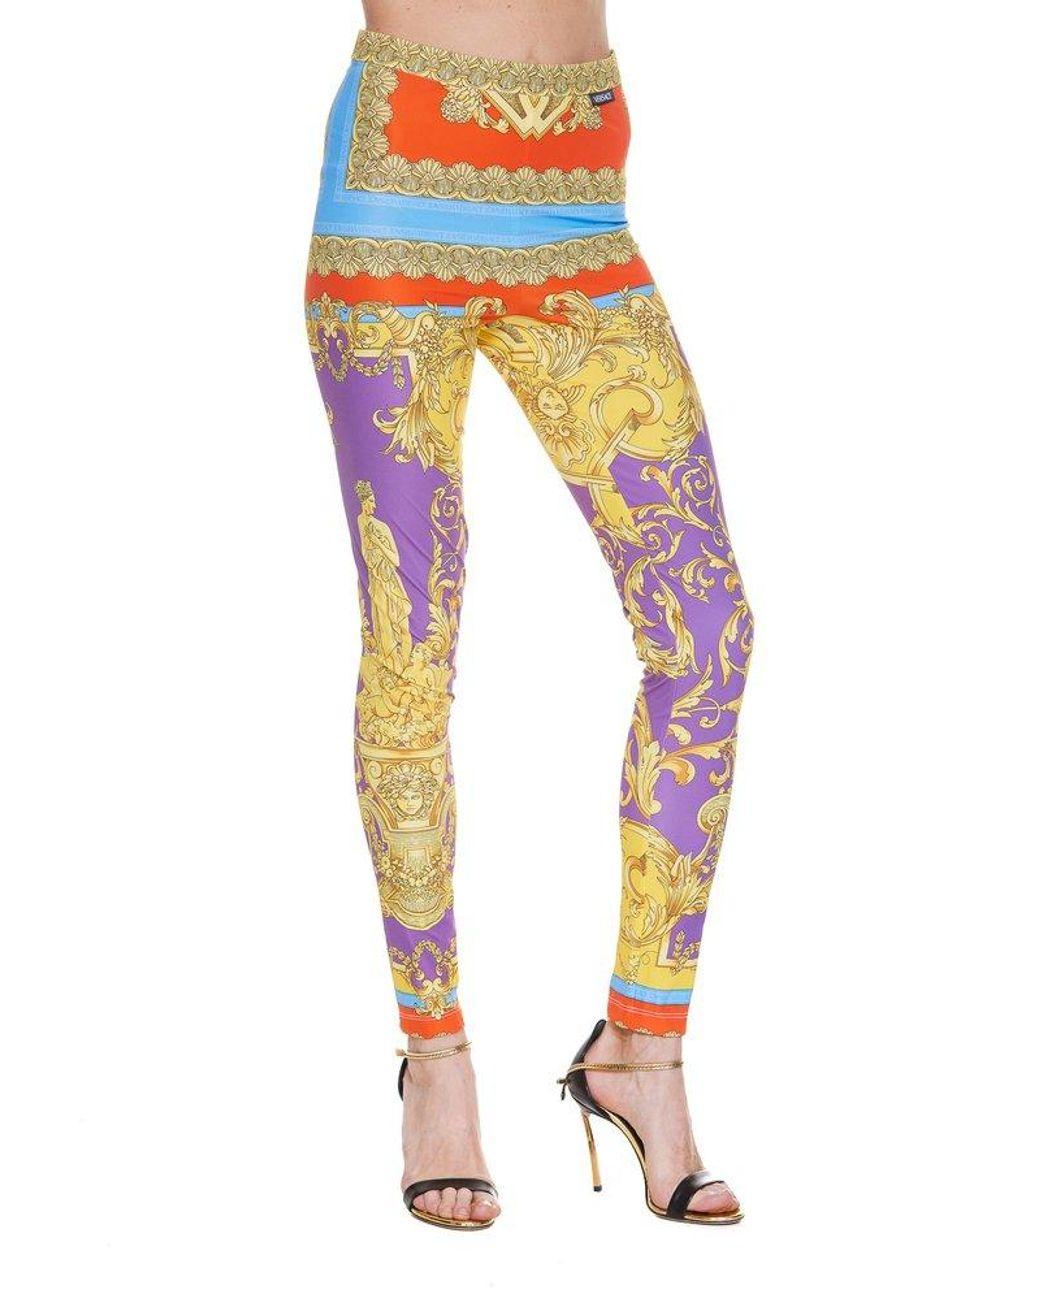 Versace Heritage Legging in Dark Orchid & Sun Baroque Print SZ 38 In New Condition For Sale In PUTNEY, NSW